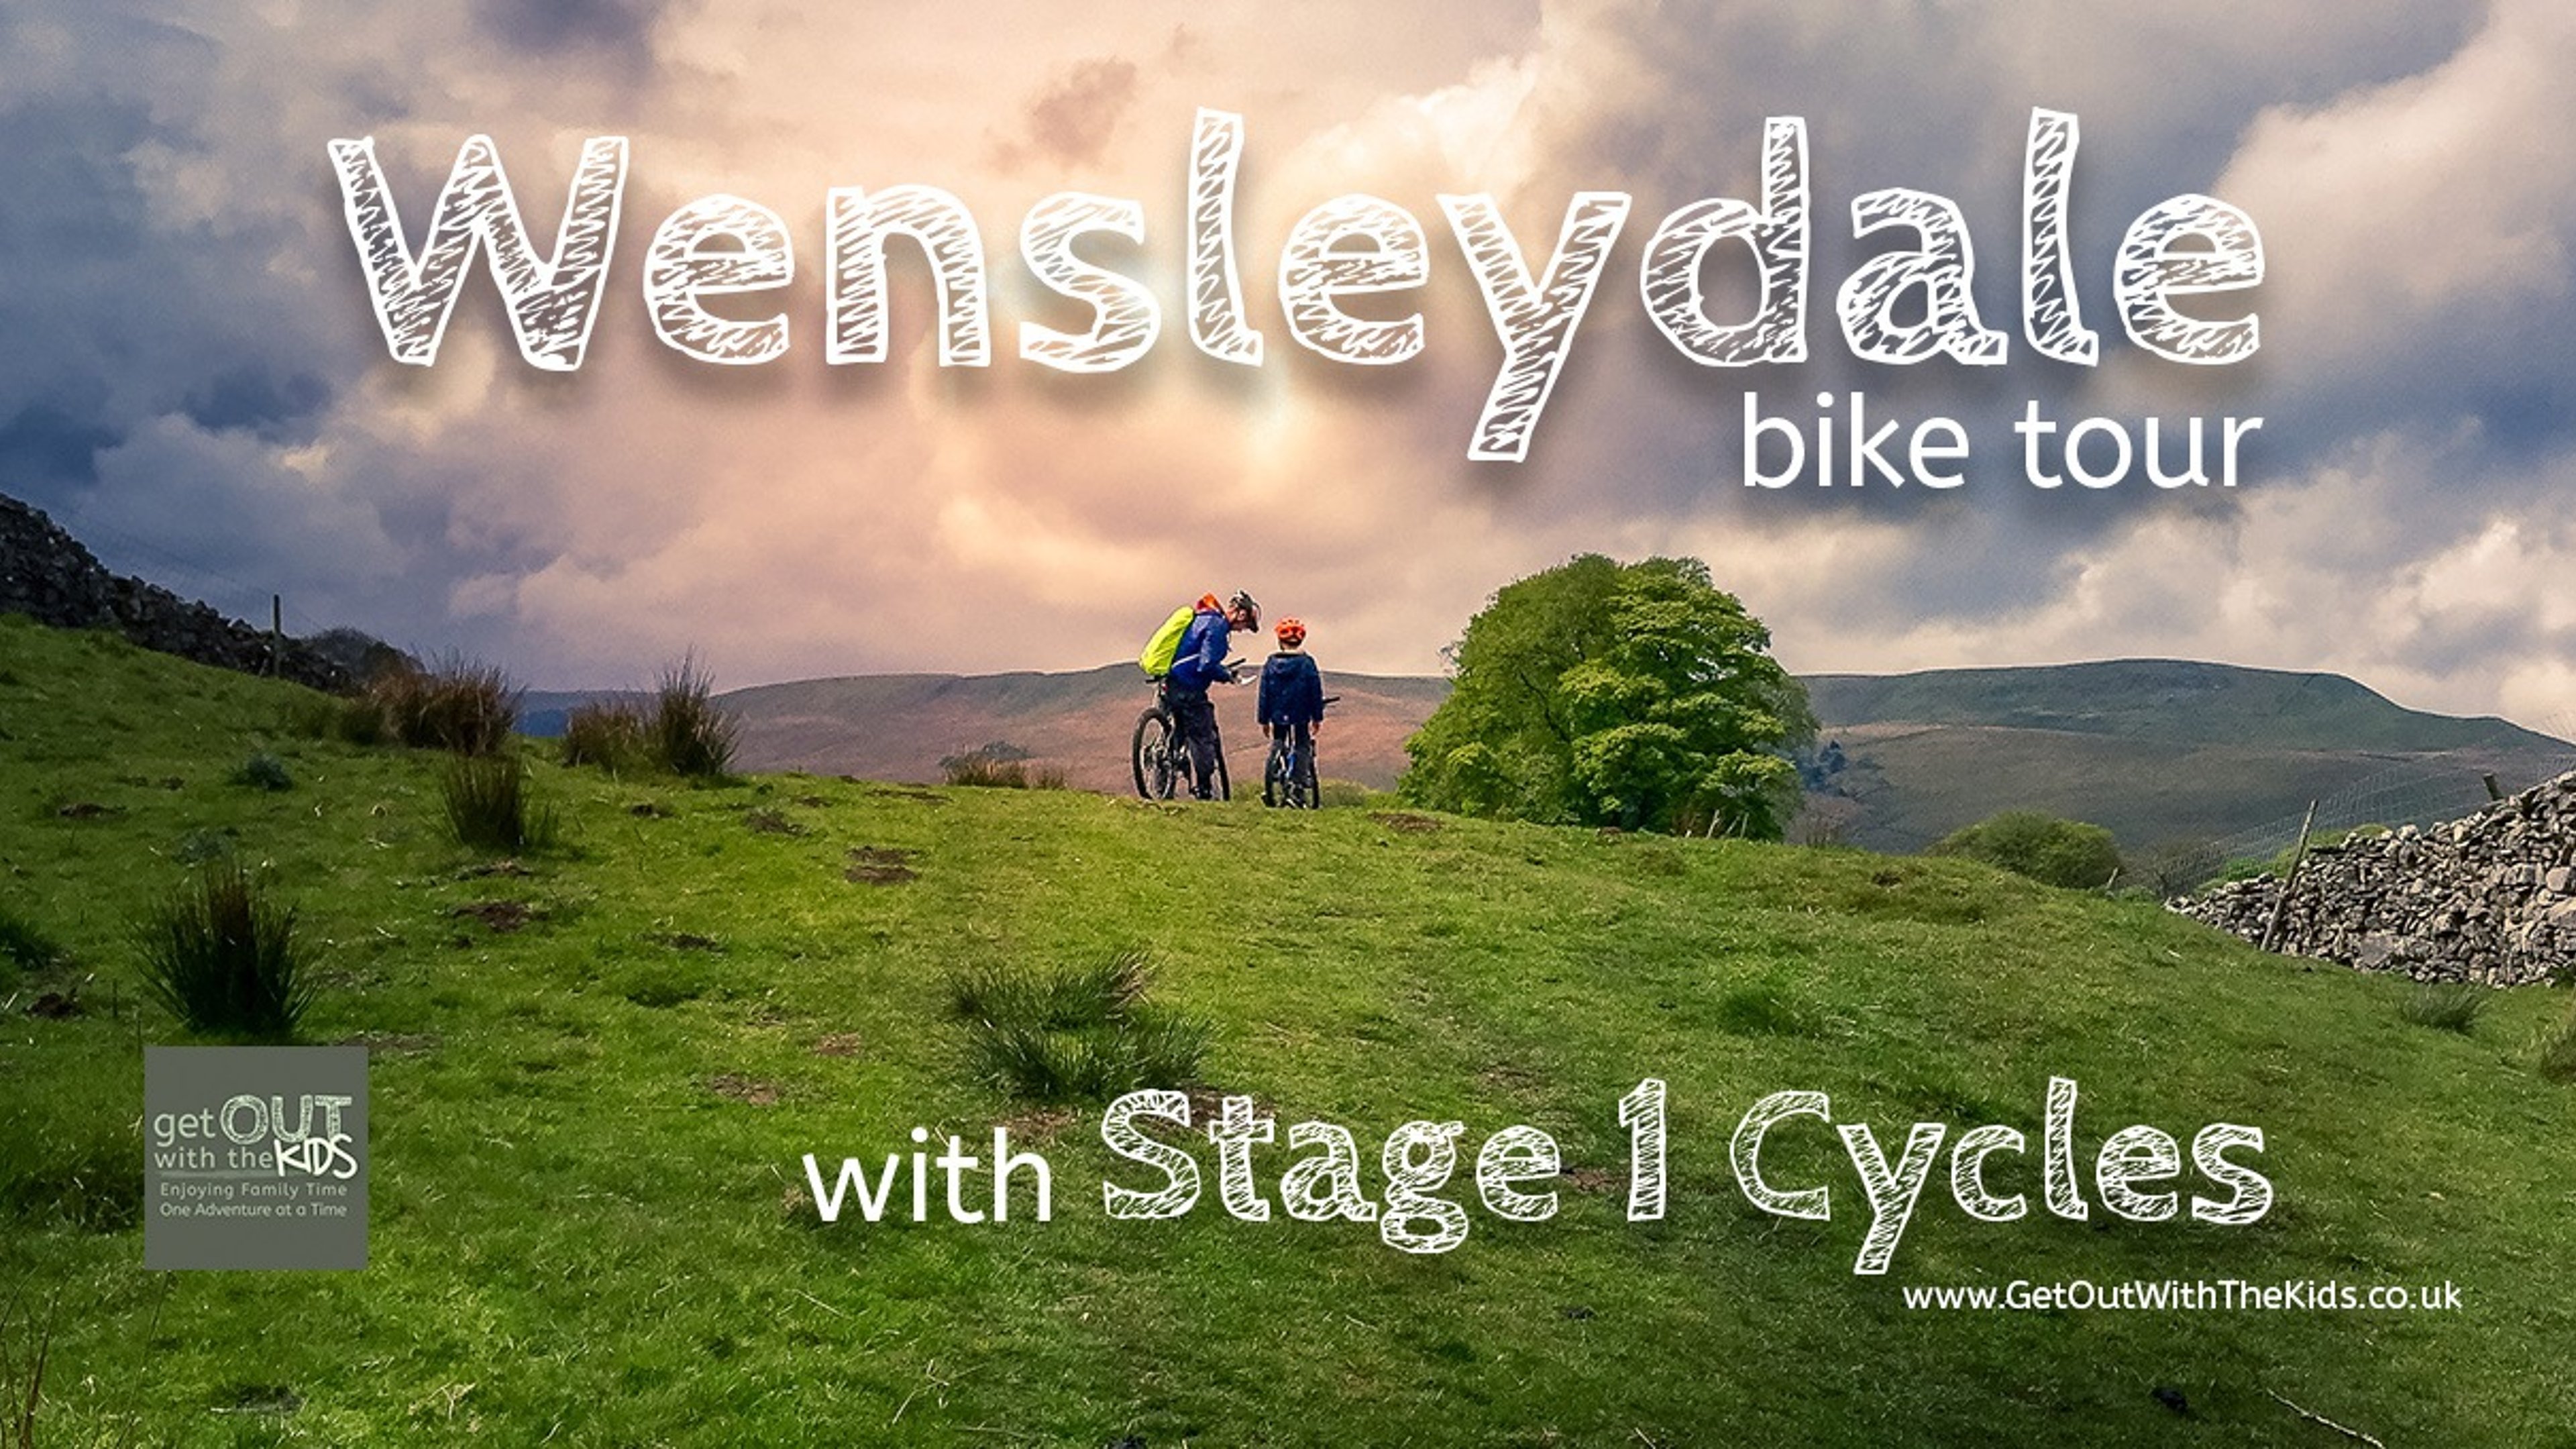 A Wensleydale Bike Tour with Stage 1 Cycles